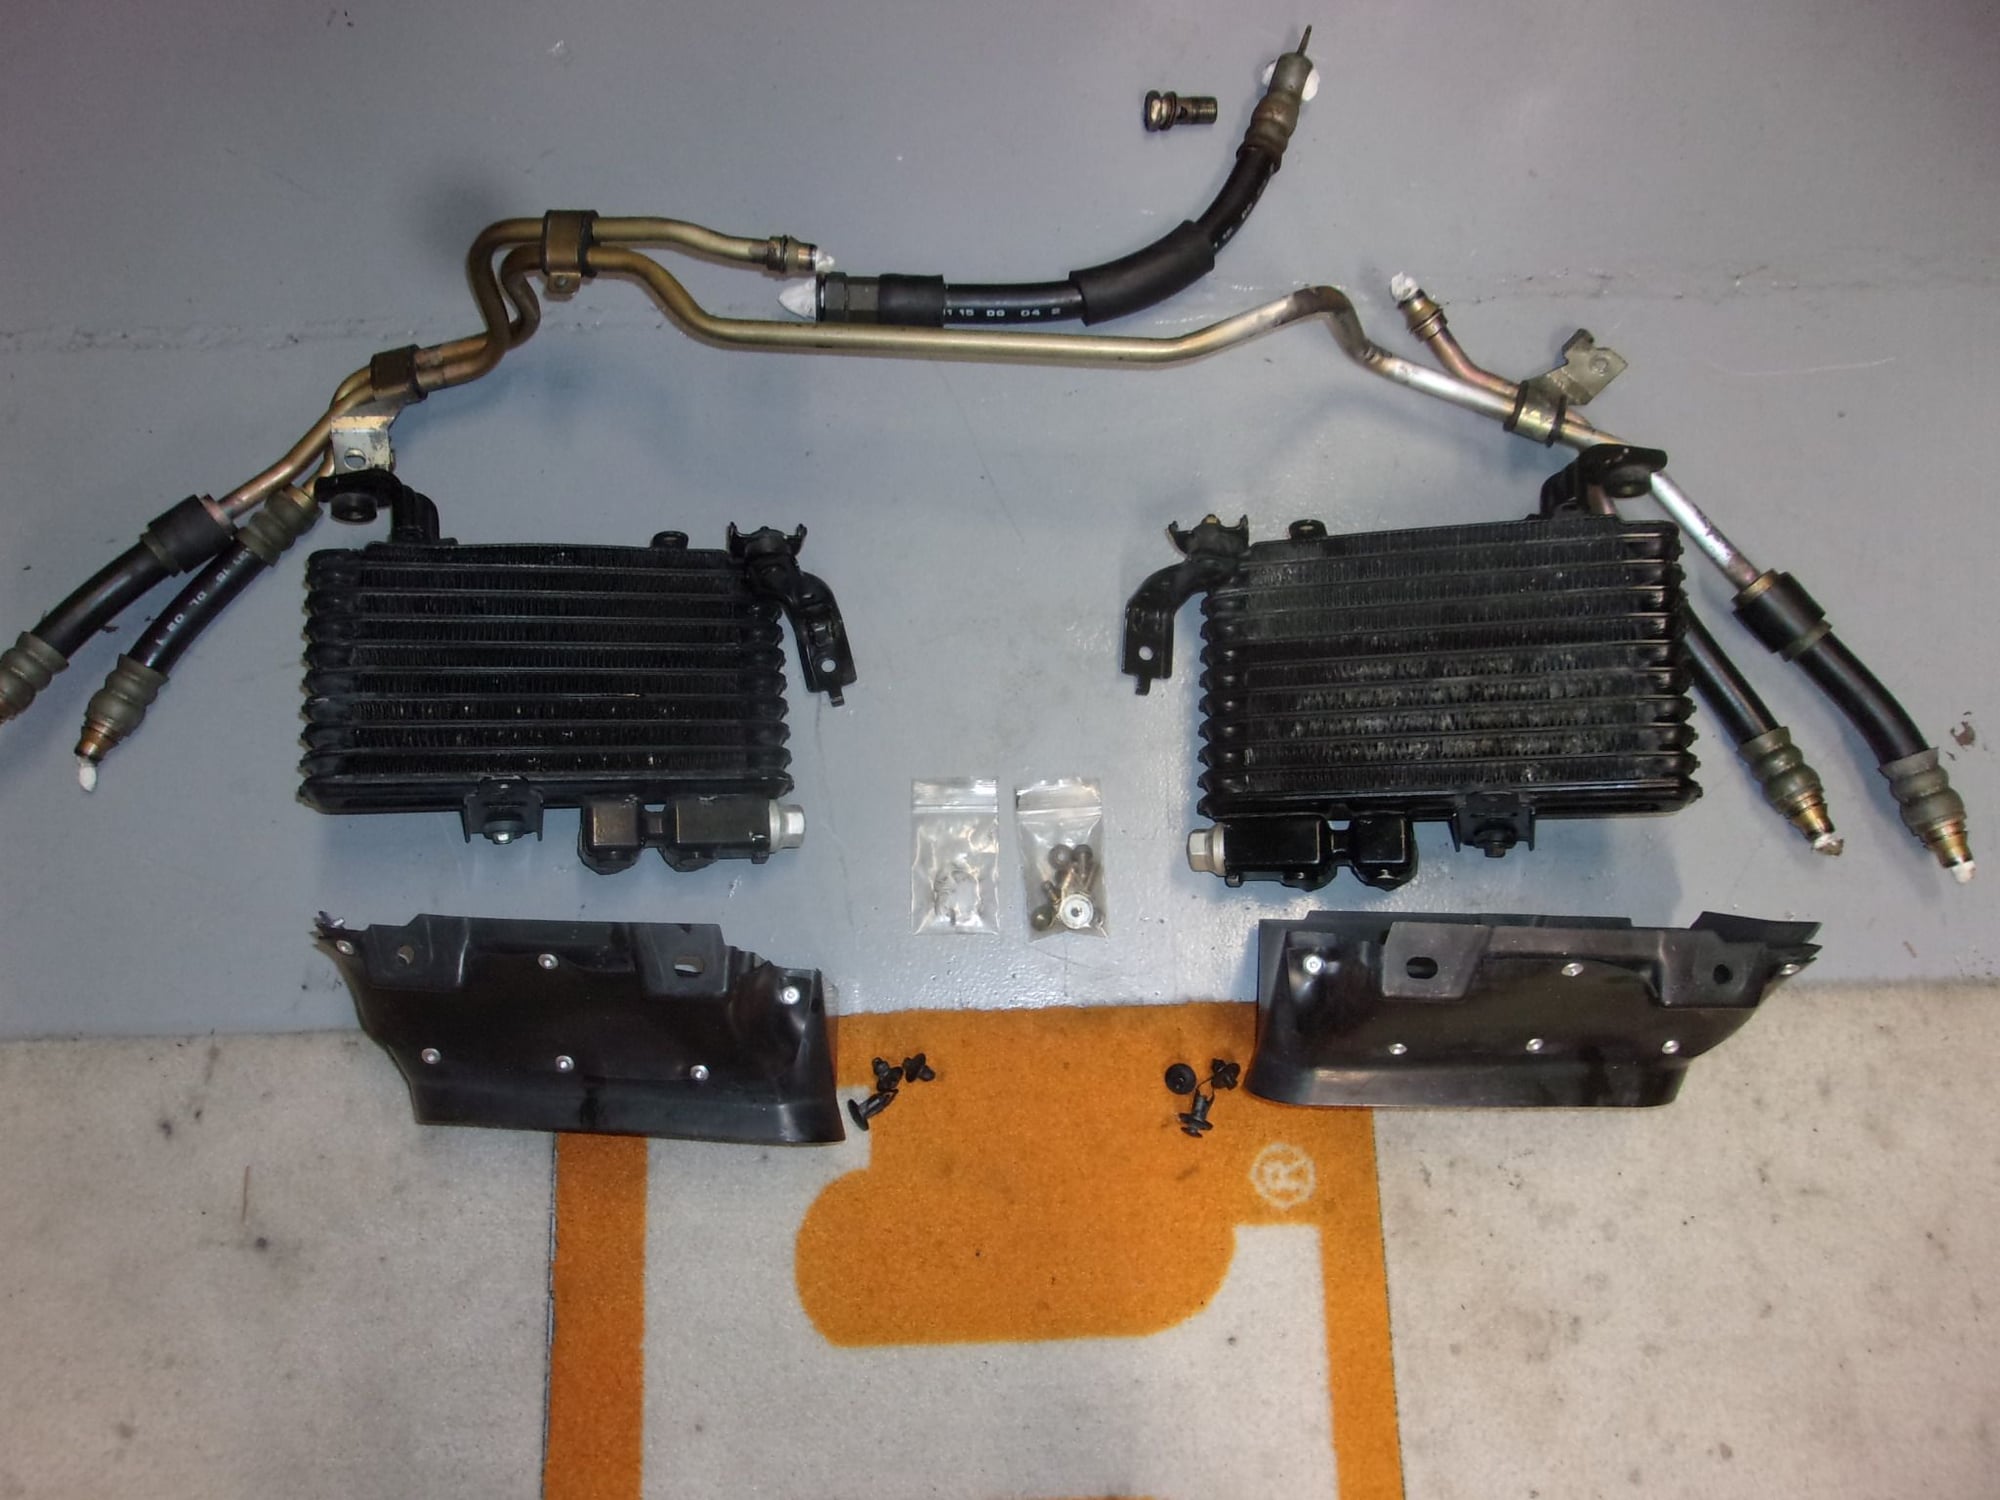 Engine - Internals - OEM Dual Oil Cooler Assembly - Used - 1993 to 2002 Mazda RX-7 - Murfreesboro, TN 37130, United States